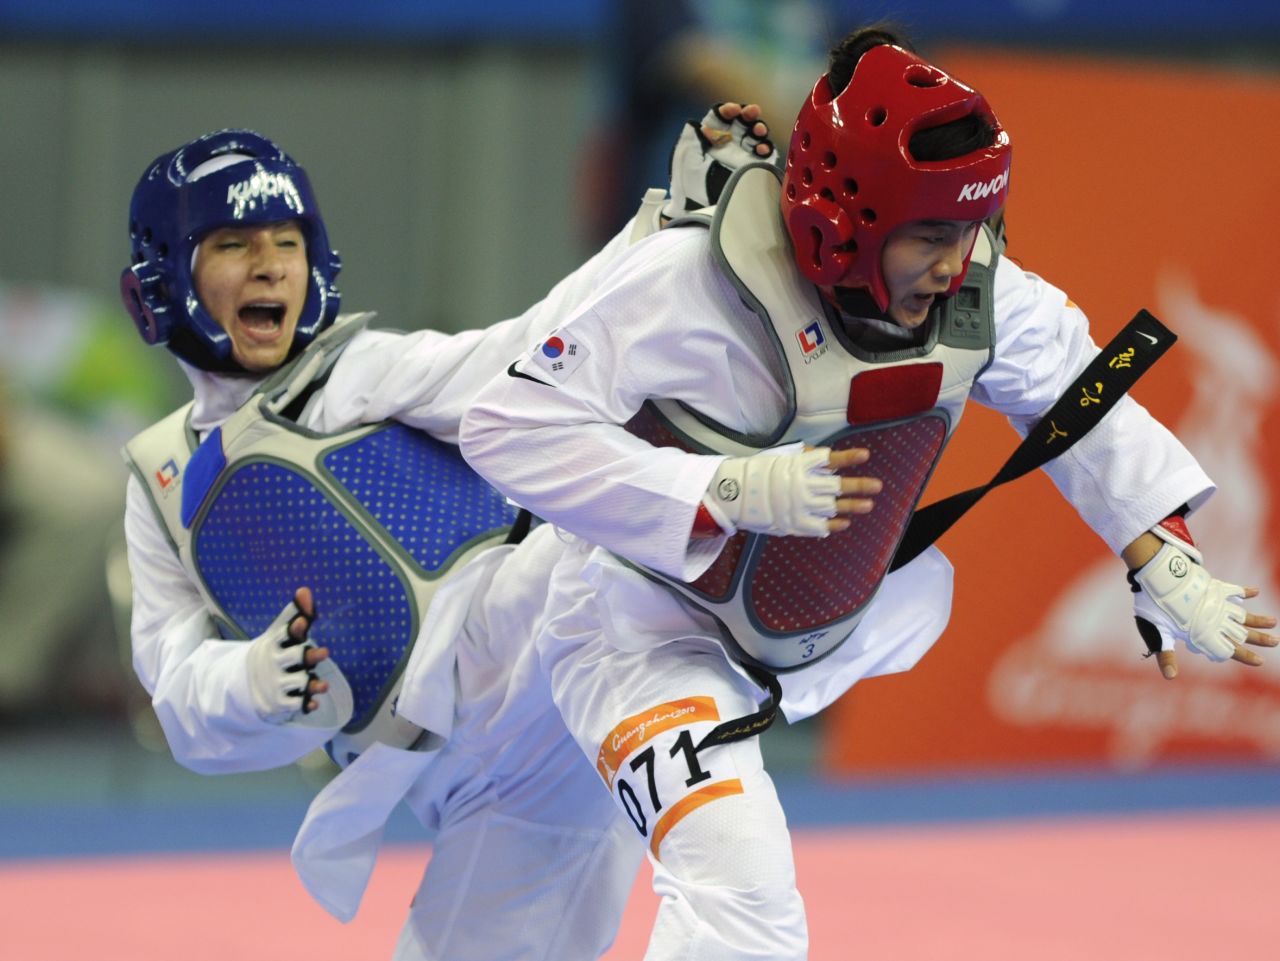 Raheleh Asemani, formerly a taekwondo athlete for Iran, <em>was</em> on the shortlist for the Olympic Refugee Team -- but will now compete for Belgium in Rio having been granted citizenship.